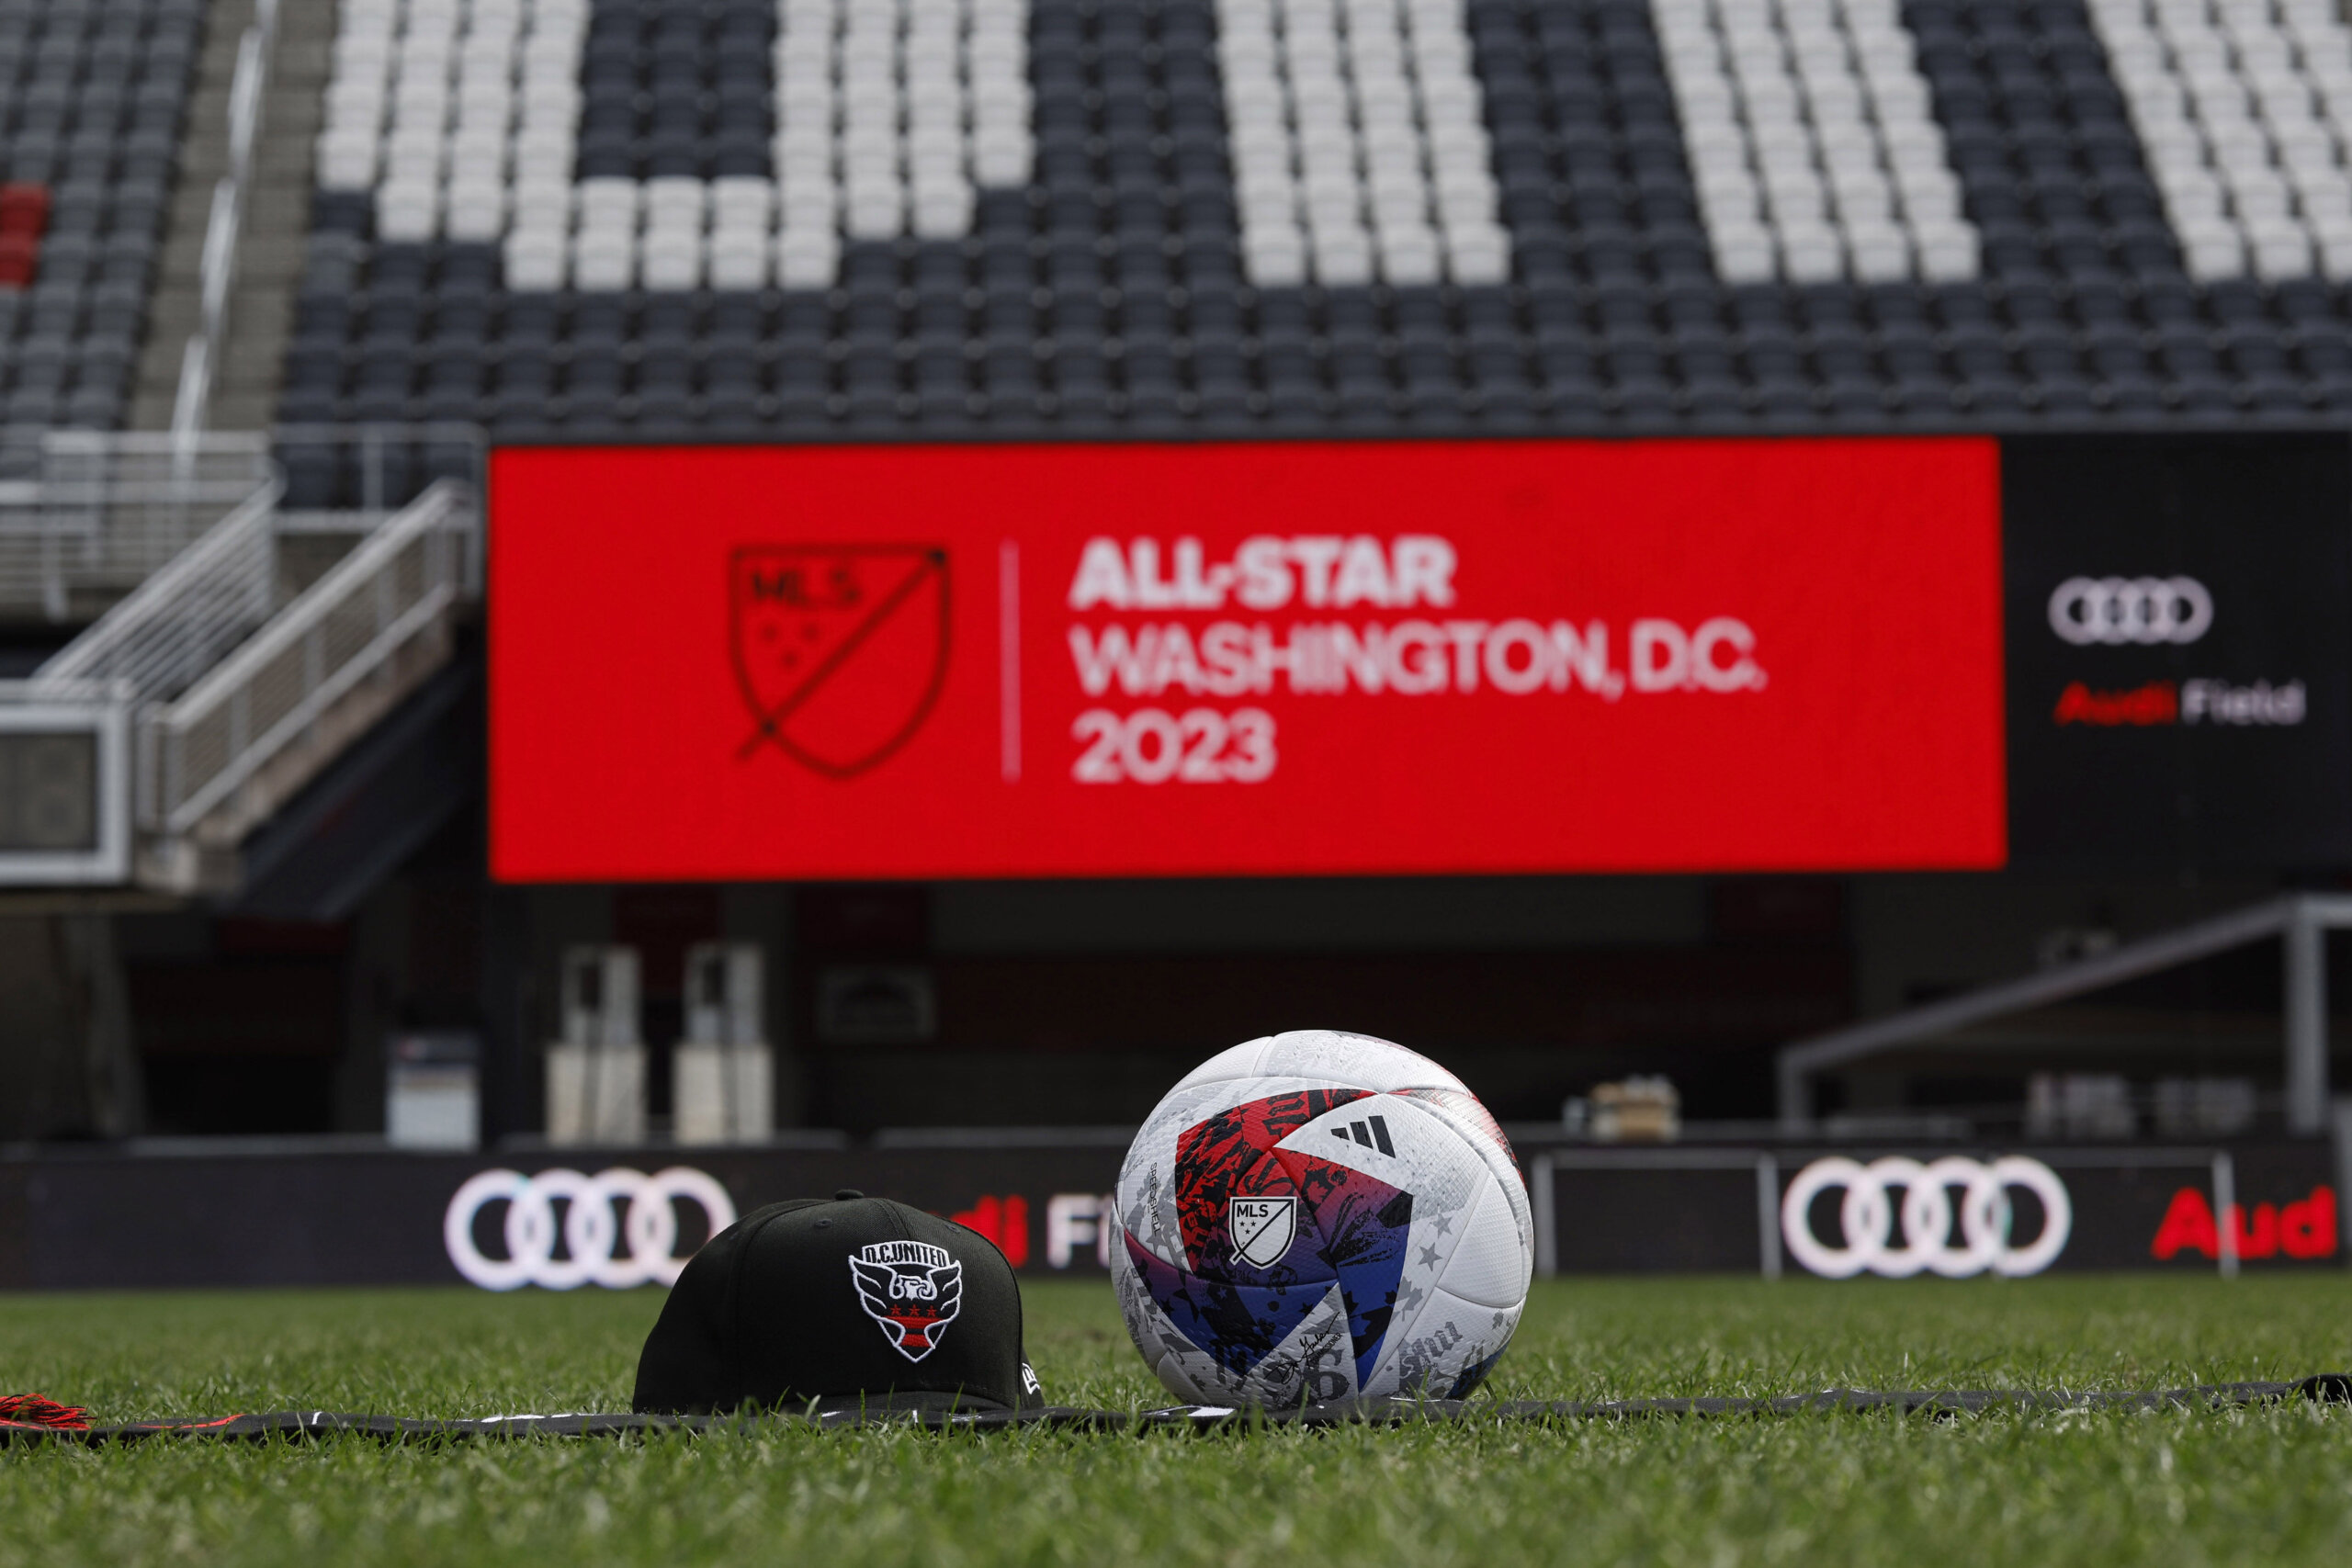 Vote to send your favorite Orlando City player to the 2023 MLS All-Star  Game